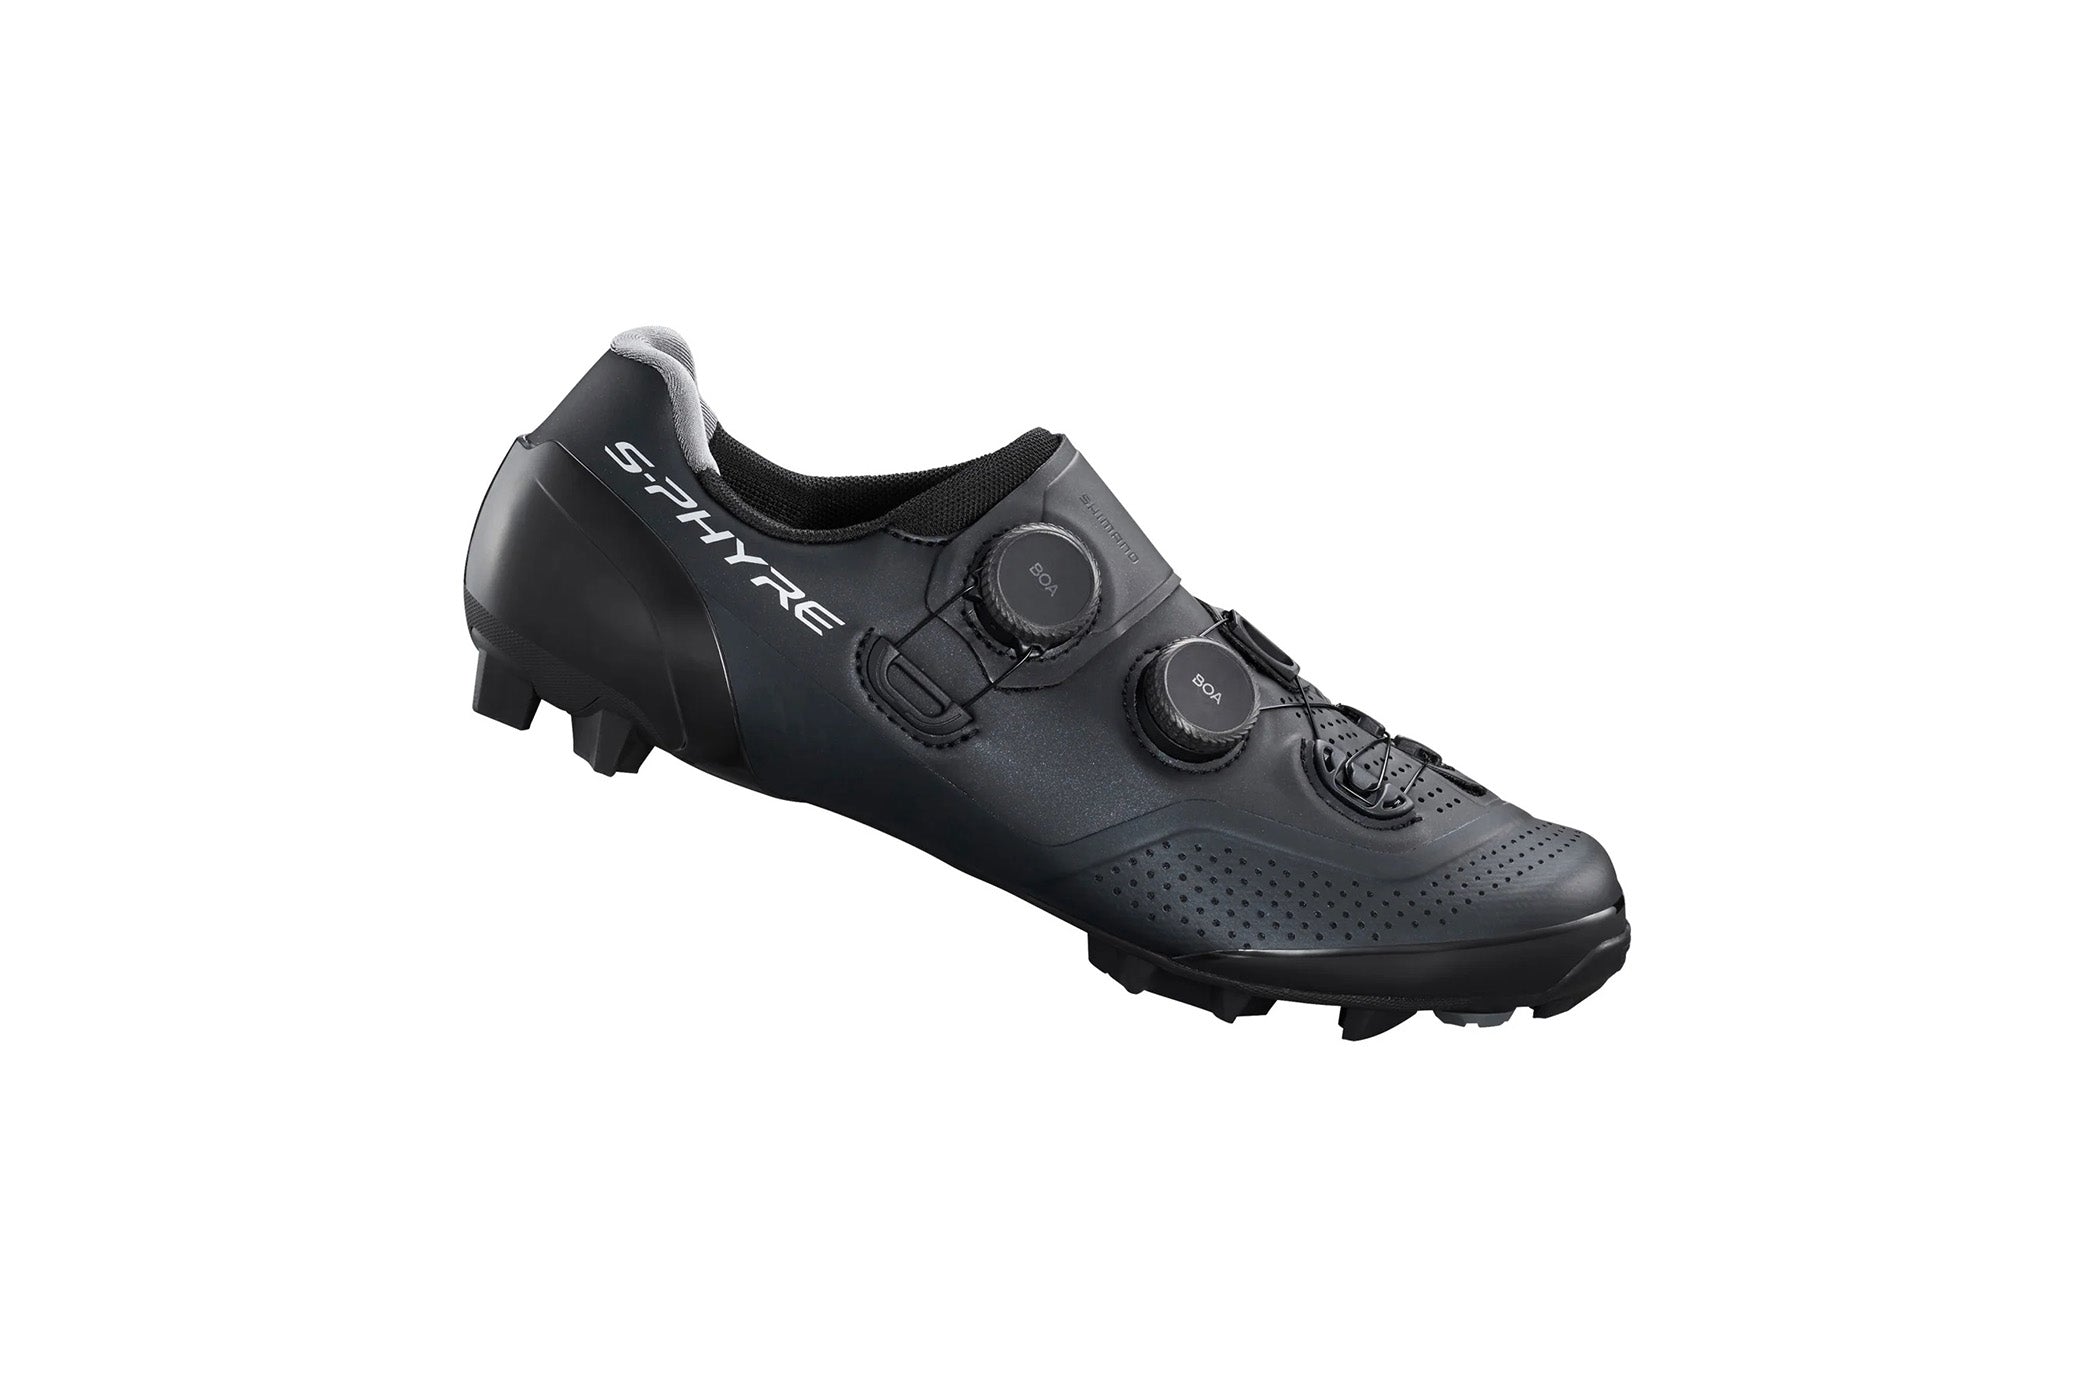 Shimano SH-XC902 S-PHYRE Wide MTB Shoes | The Pro's Closet | AFW12485